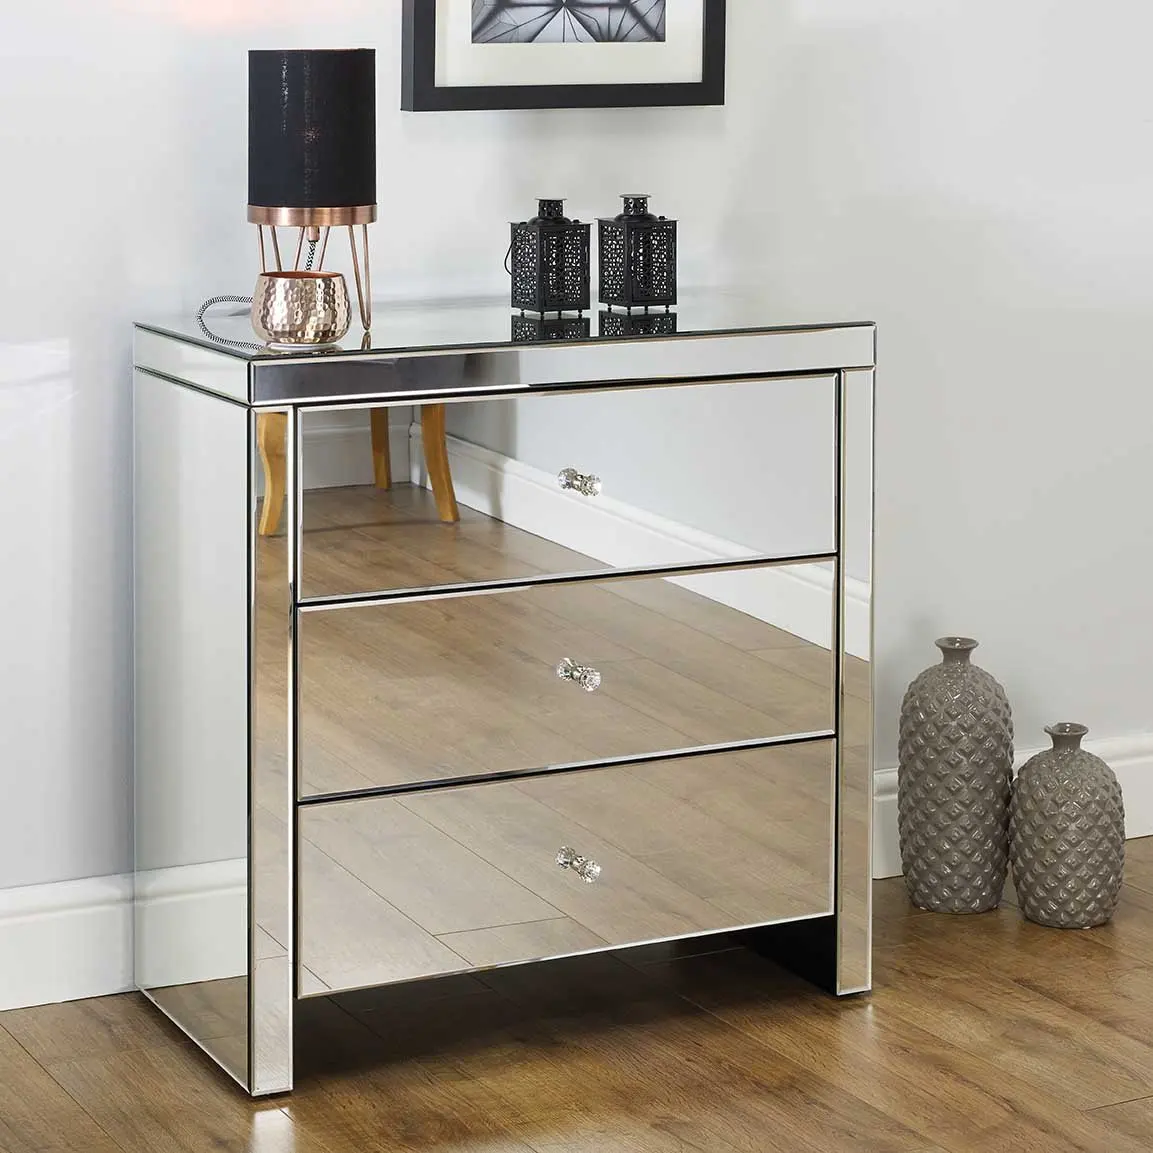 6 Drawer Sideboard Mirrored Chest of Drawers Mirrored Furniture